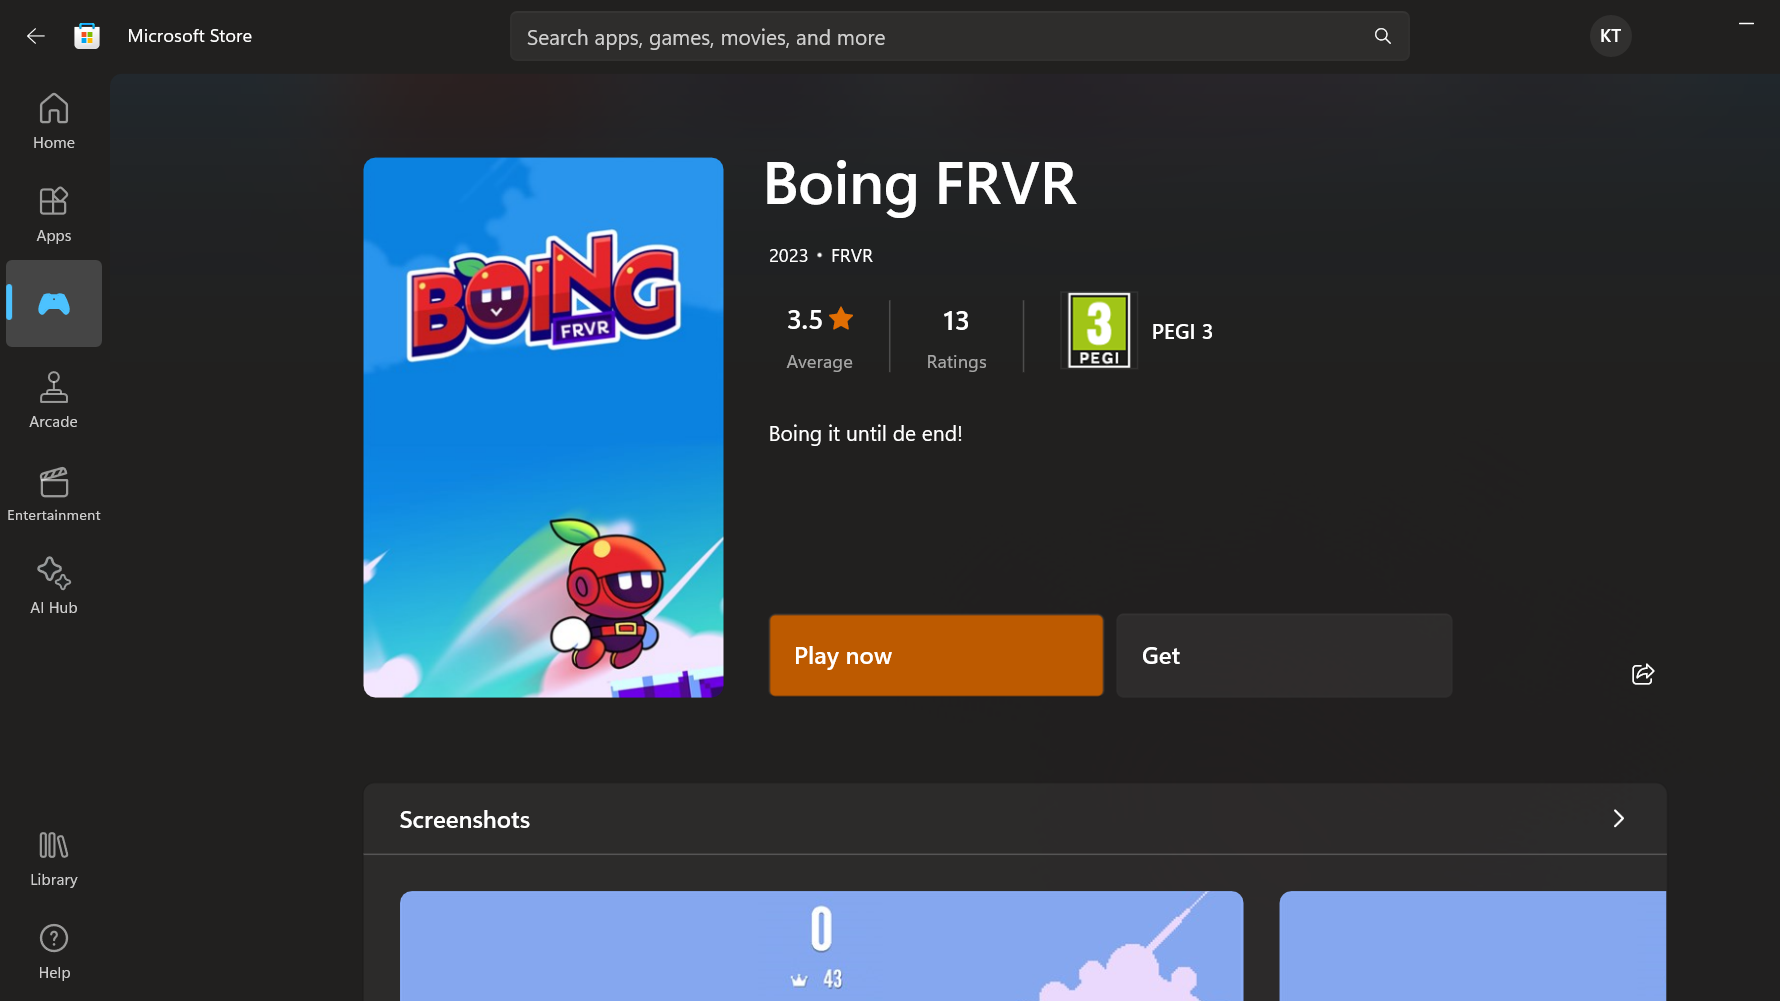 Screenshot of instant game Boing FRVR from Microsoft Store